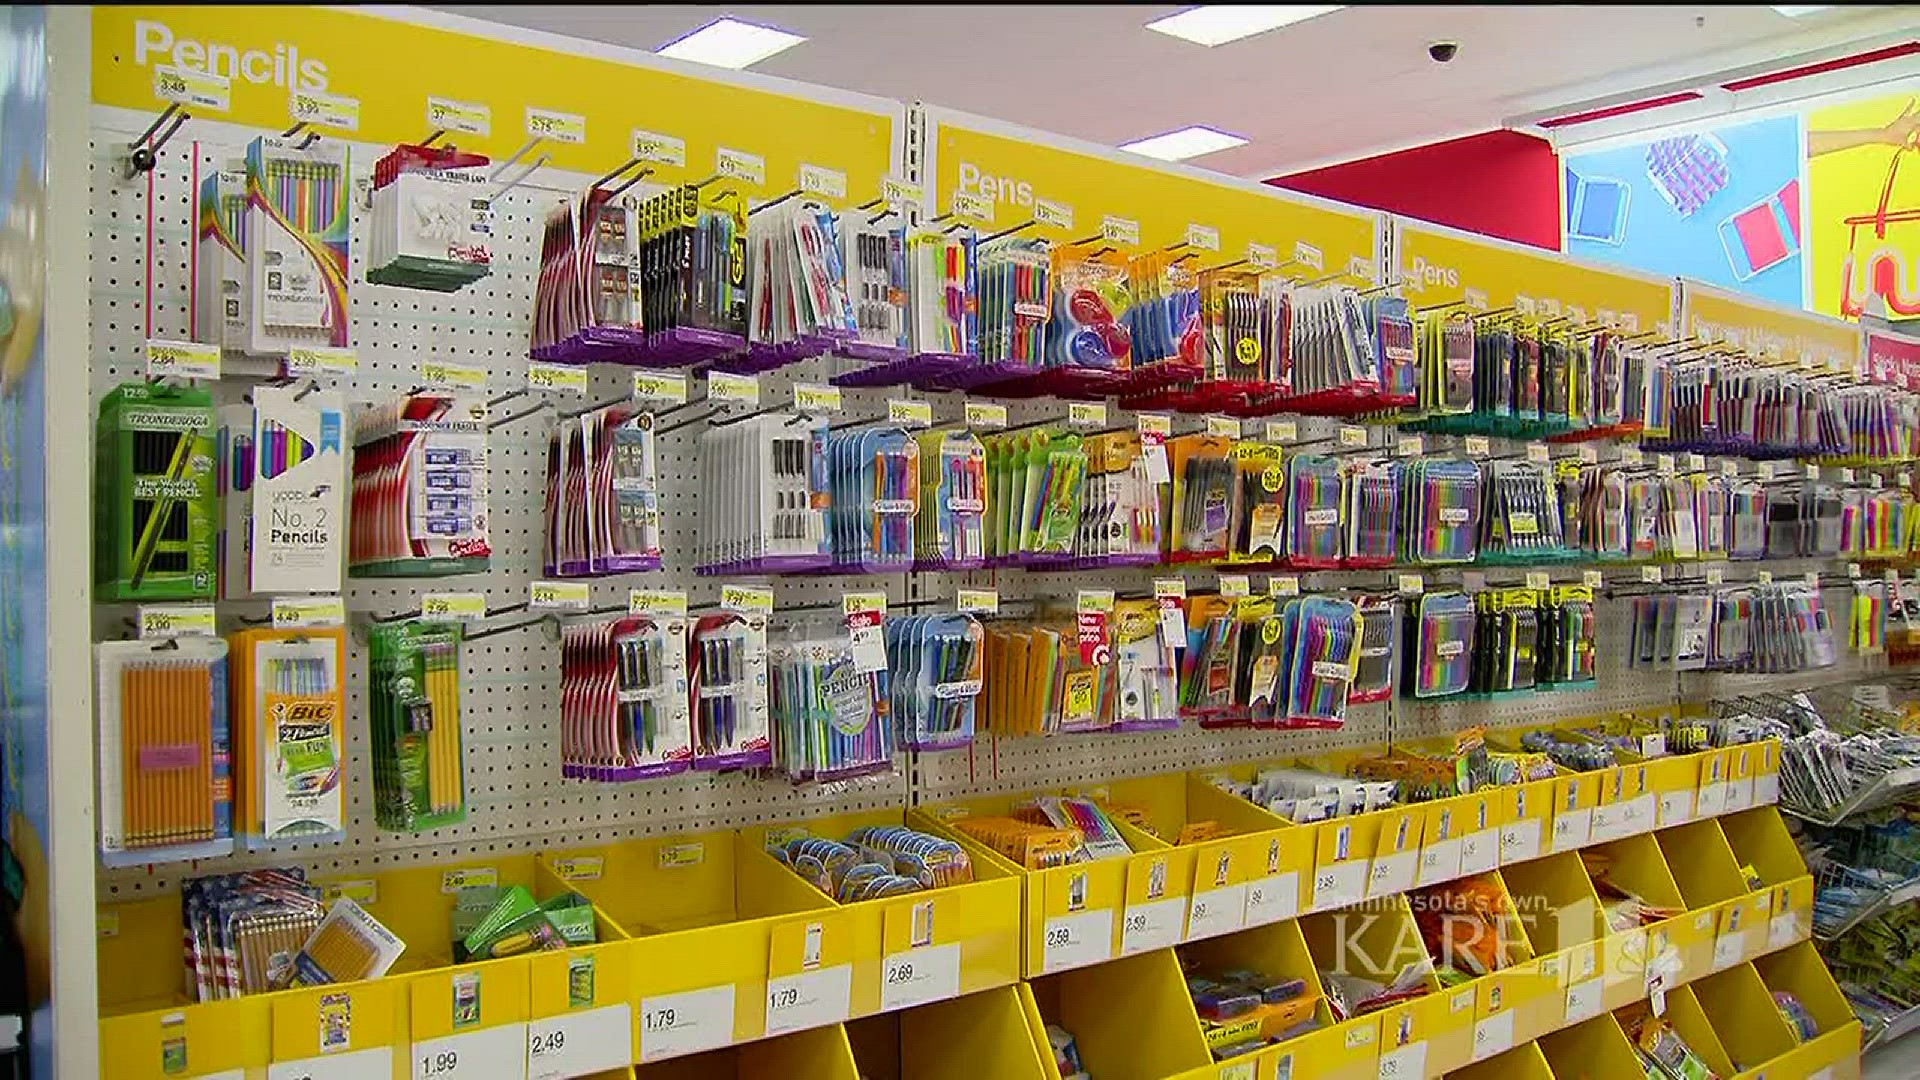 Back to school shopping will total an estimated $27 billion this year, according to Deloitte's survey.  Parents will spend an average of $501 per child on clothes, supplies, computers, and gadgets. http://kare11.tv/2tOhUKN